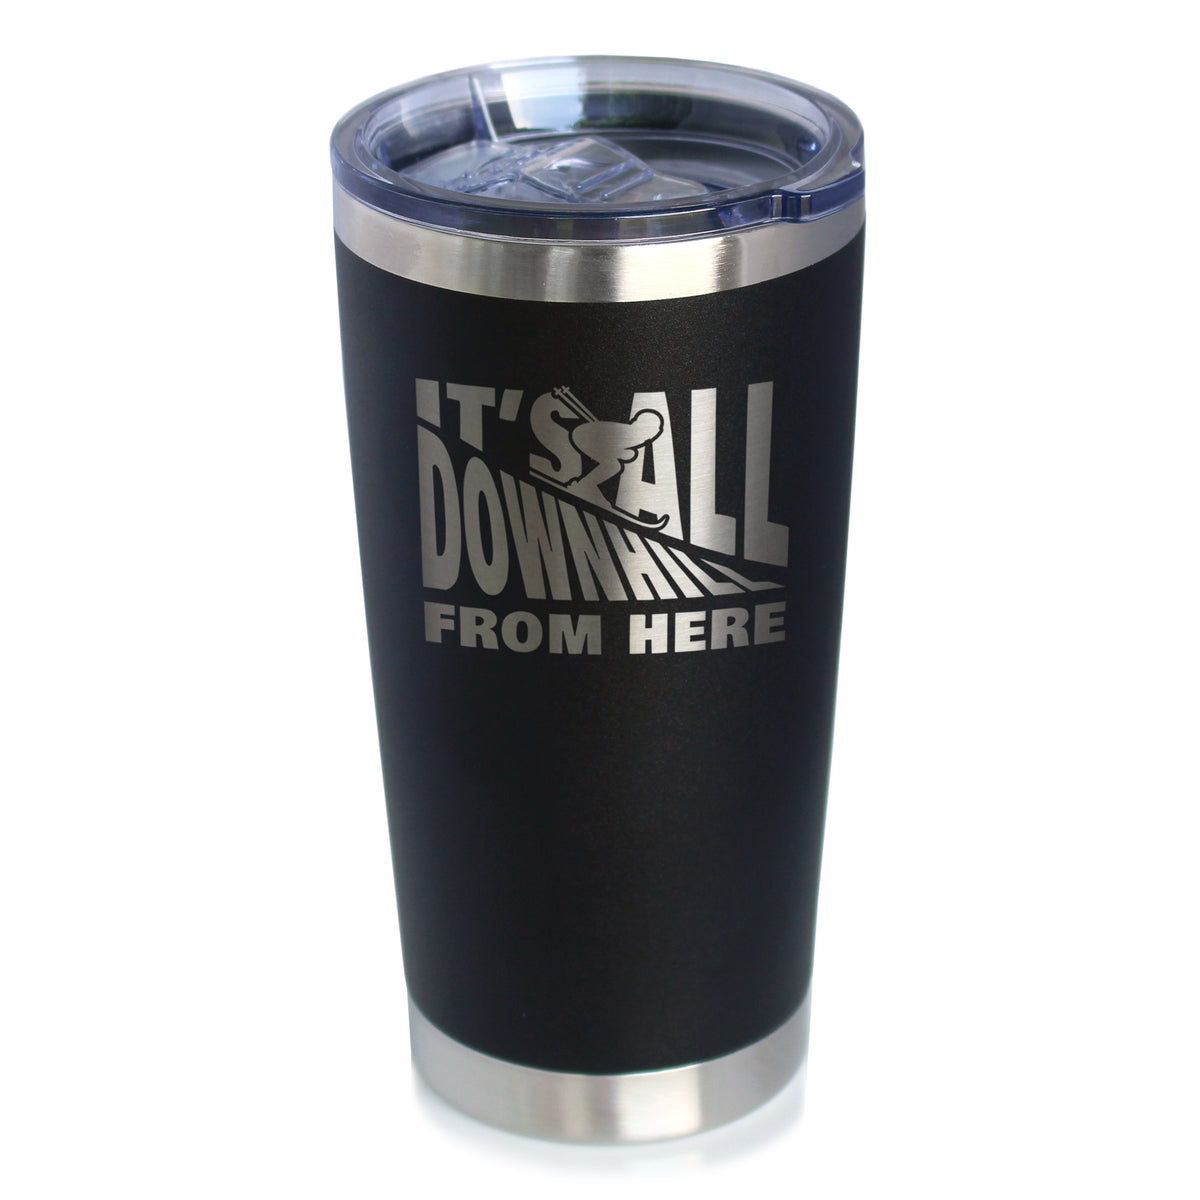 It&#39;s All Downhill From Here - 20 oz Insulated Coffee Tumbler - Unique Skiing Themed Decor and Gifts for Mountain Lovers